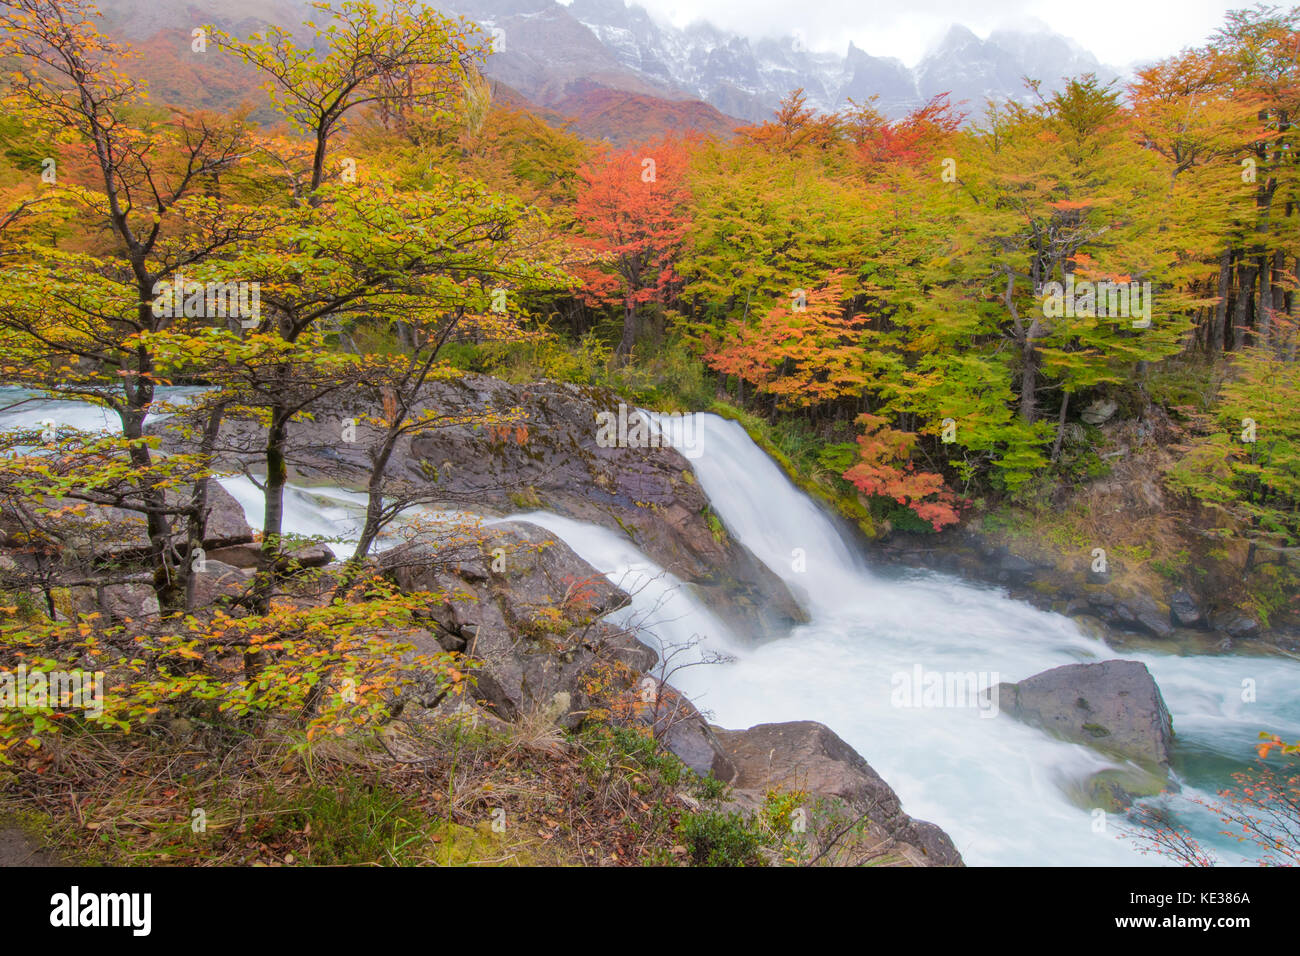 Southern beeches (Nothofagus) in autumn, Los Glaciares National Park, southern Argentina Stock Photo